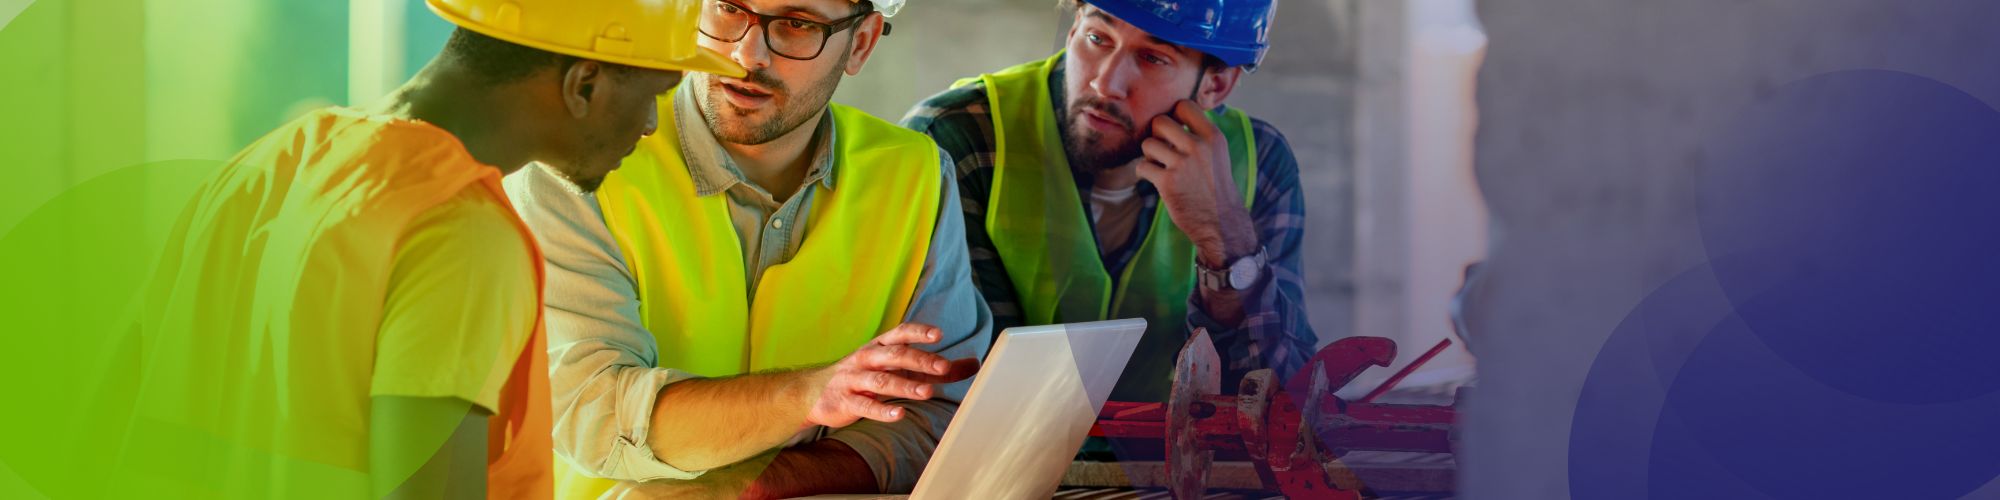 The Benefits of Working in Construction: Why This Dynamic Industry Could be Right for You